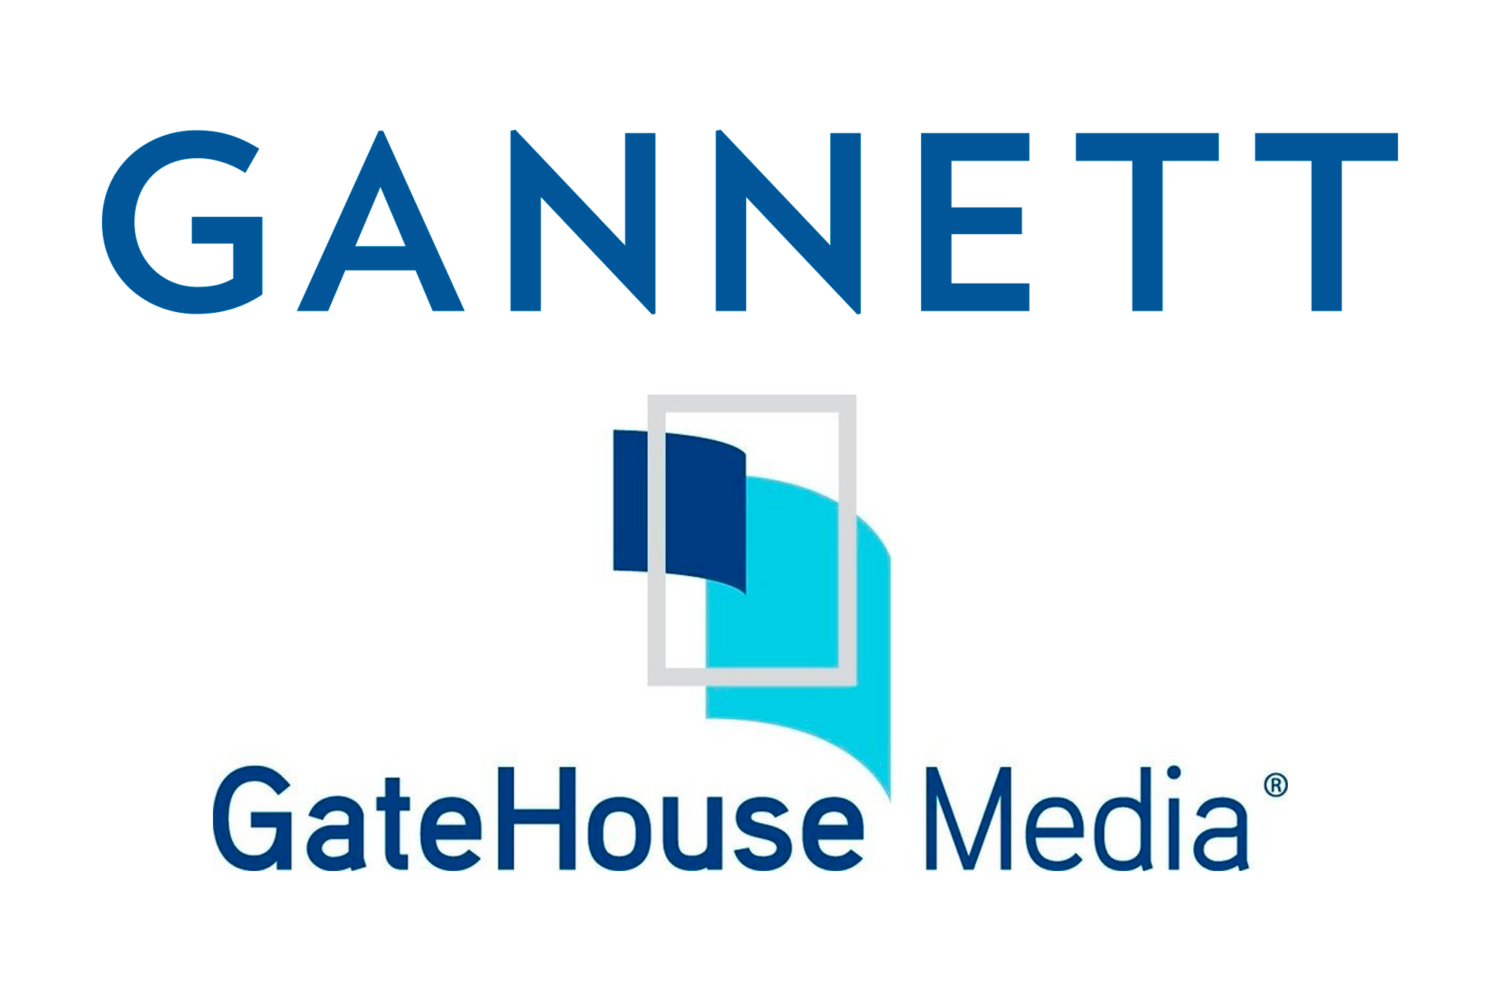 Here are the memos that GateHouse and Gannett employees got today about the merger